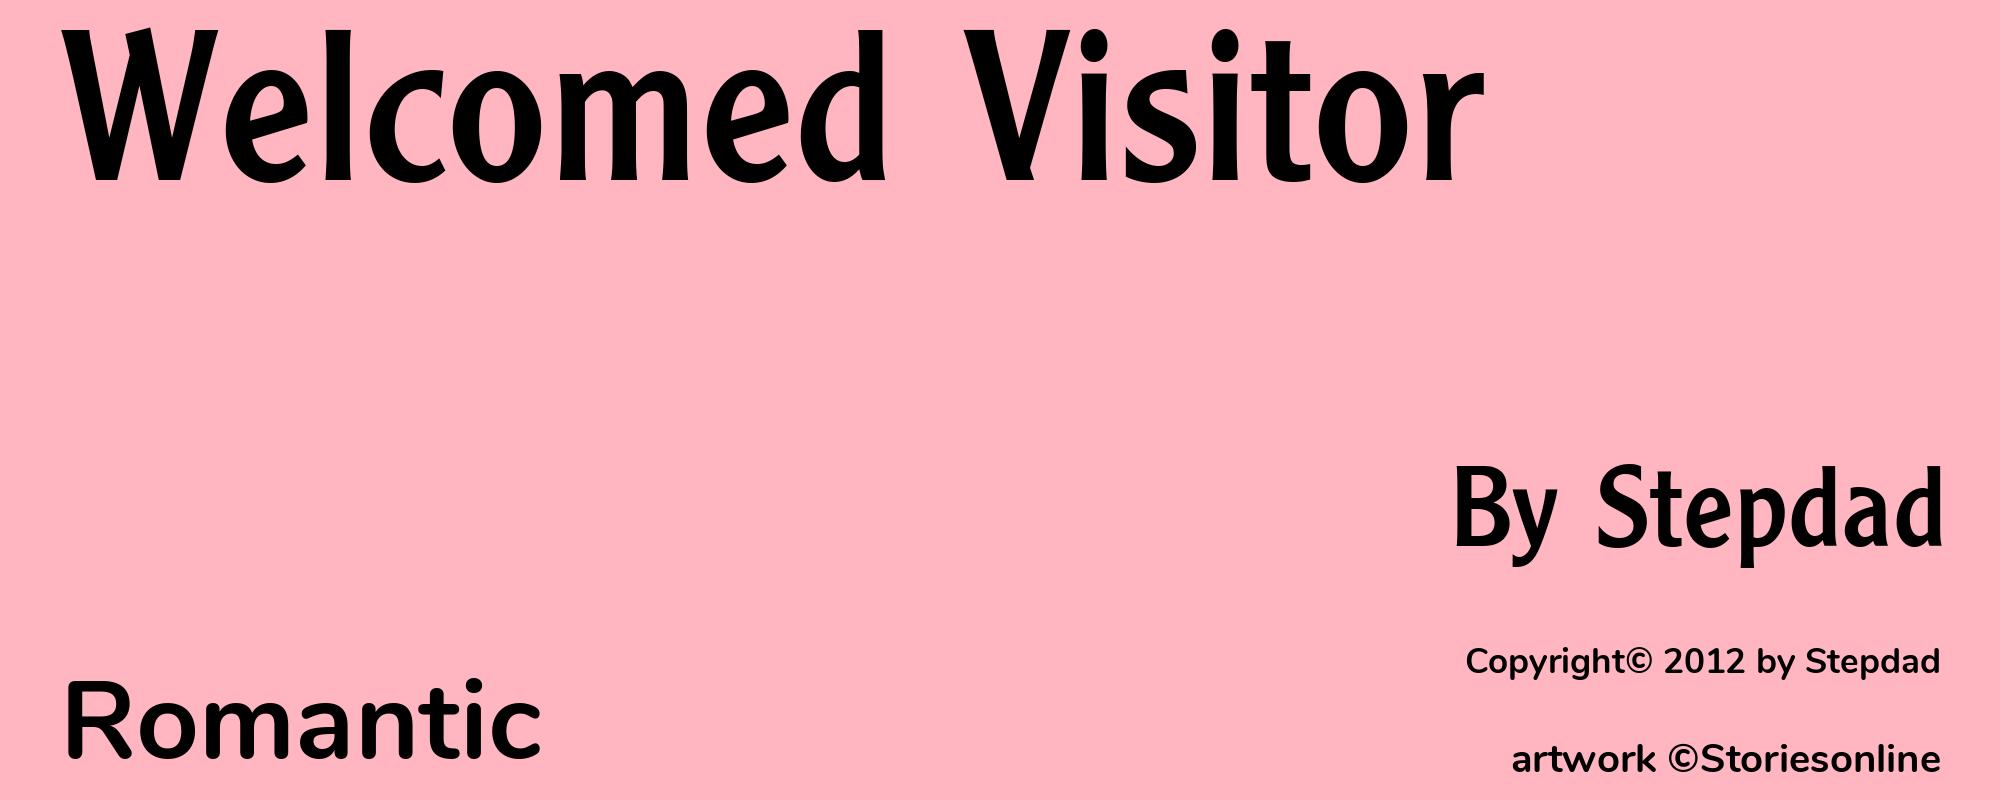 Welcomed Visitor - Cover